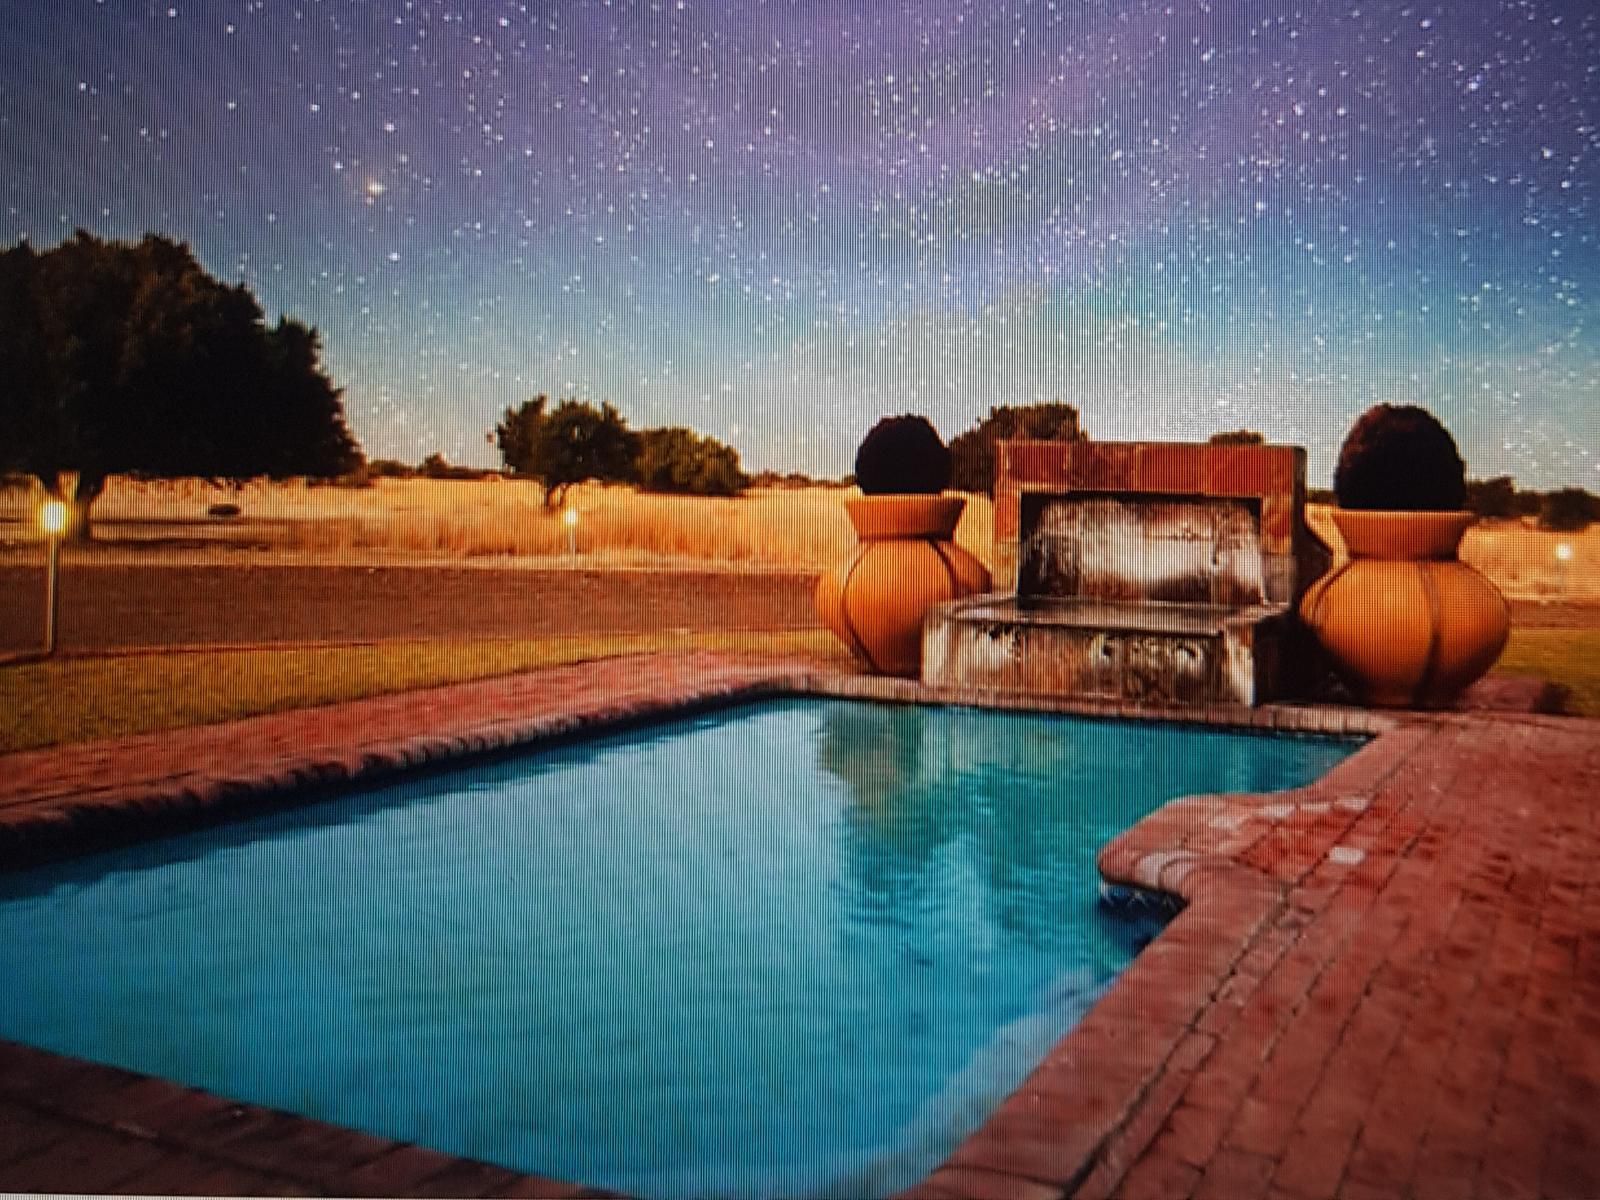 Almar Exclusive Game Ranch Bloemhof North West Province South Africa Complementary Colors, Night Sky, Nature, Swimming Pool